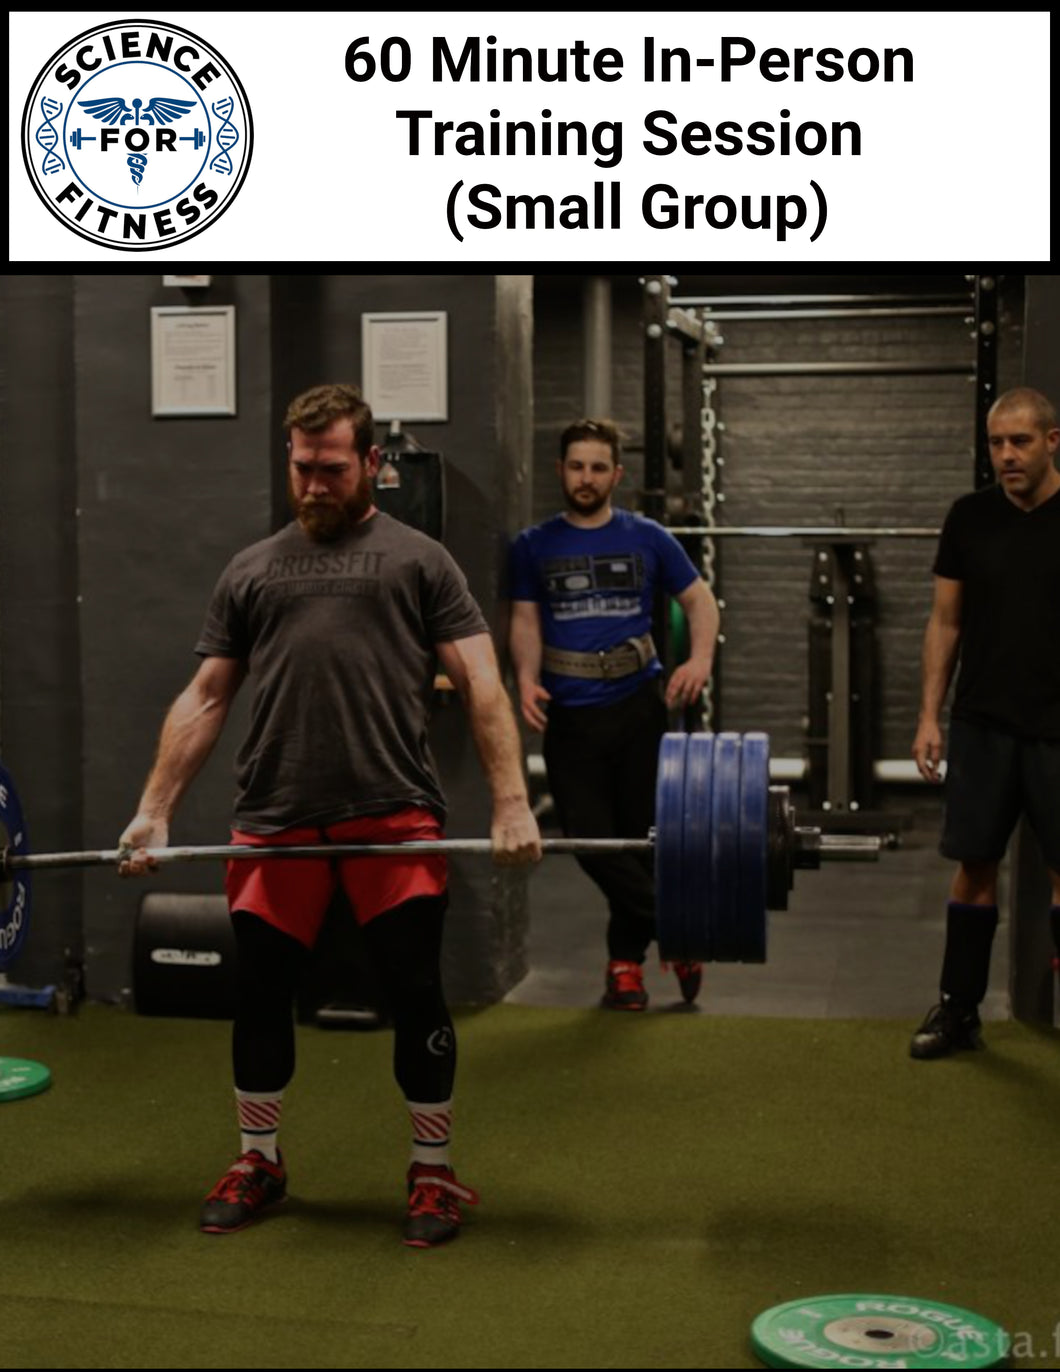 60 Min In-Person Training Session (Small Group)